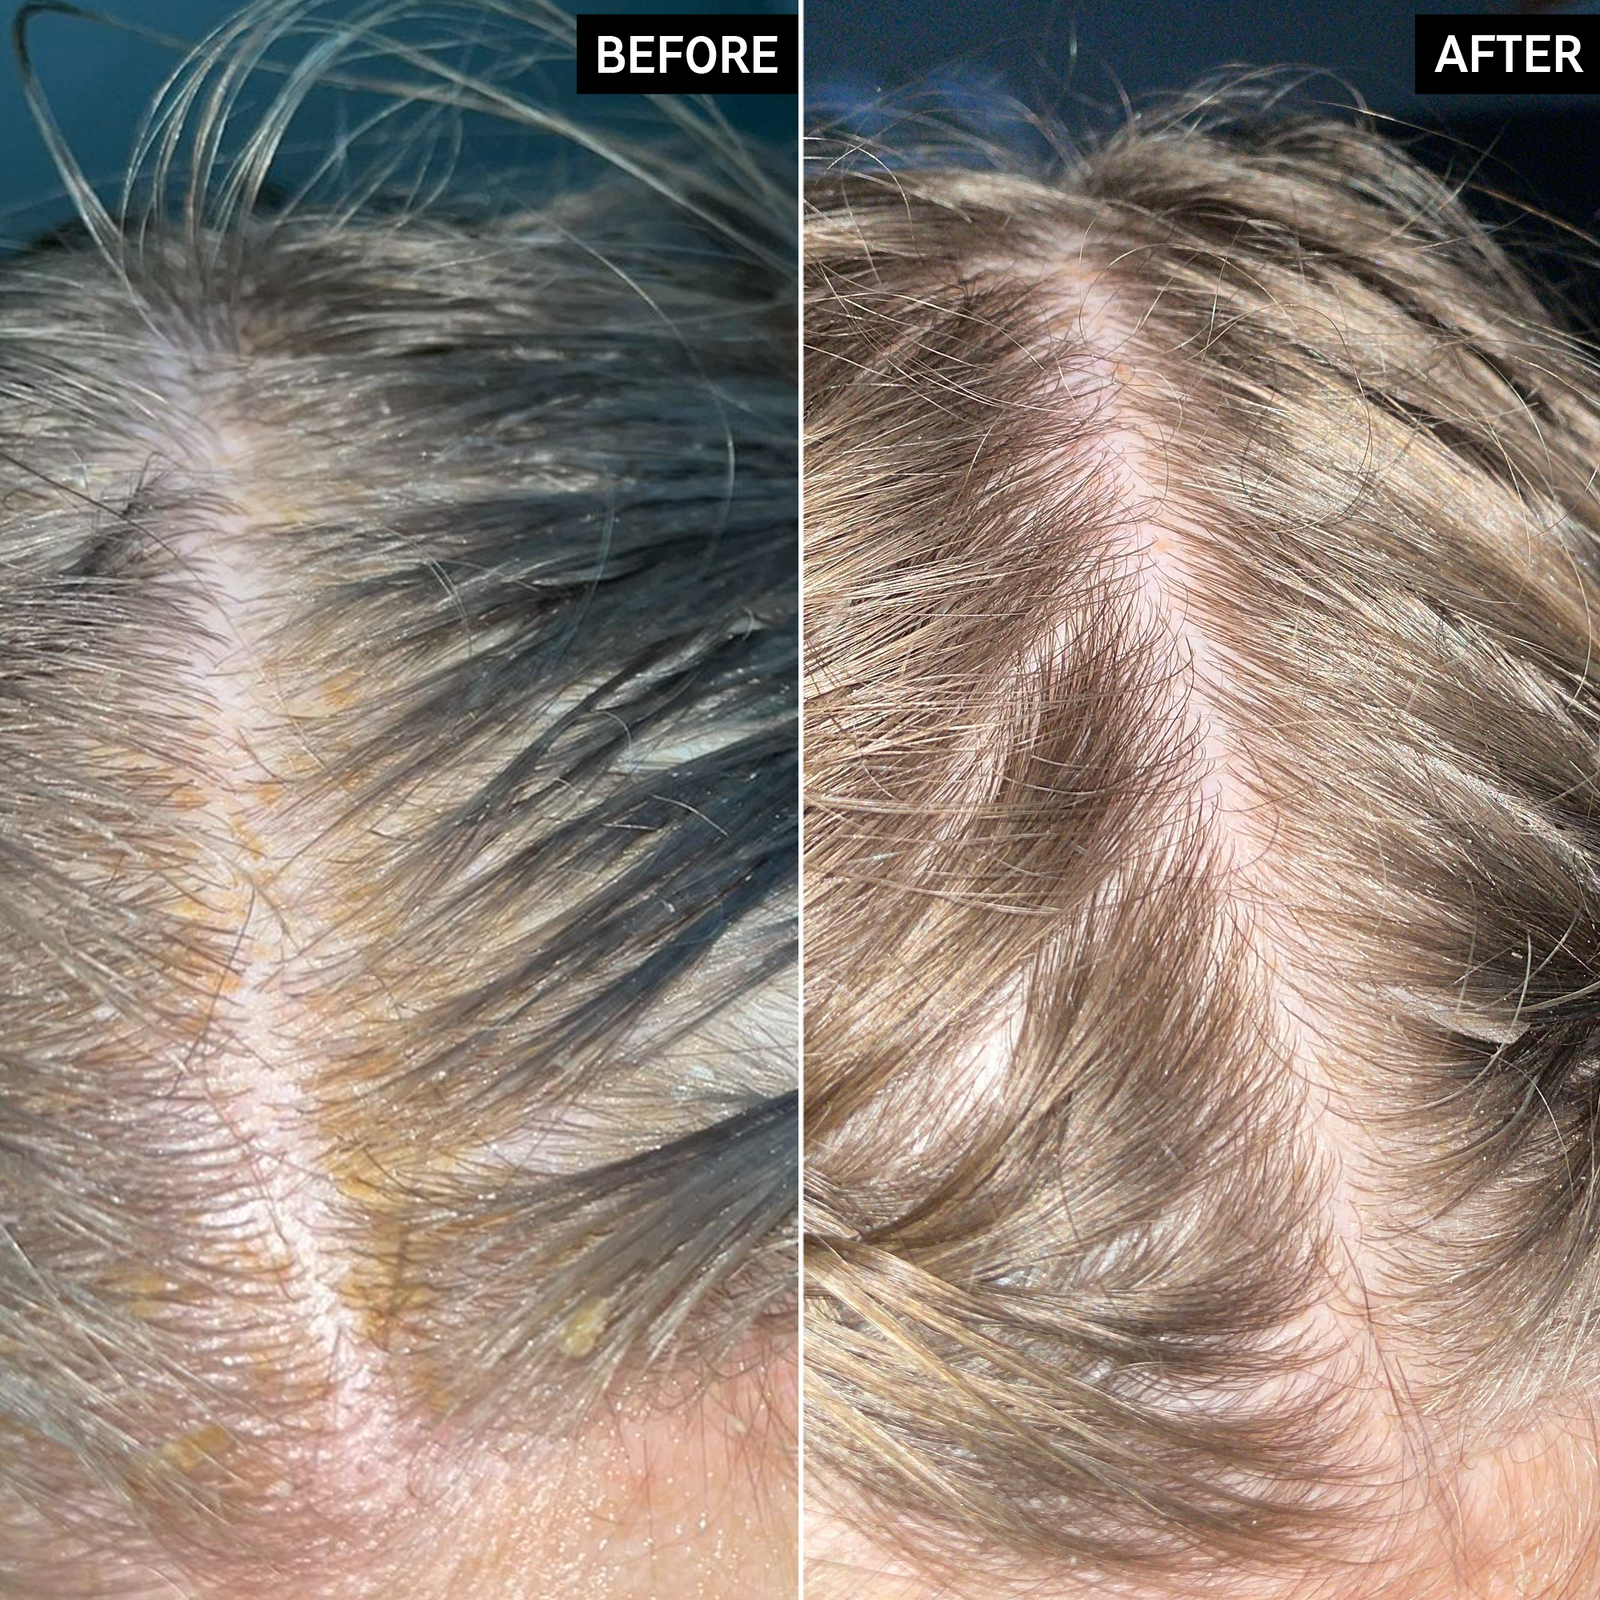 Before and After images of a customer's scalp, having used Salicylic Acid Exfoliating Scalp Treatment for 6 weeks.